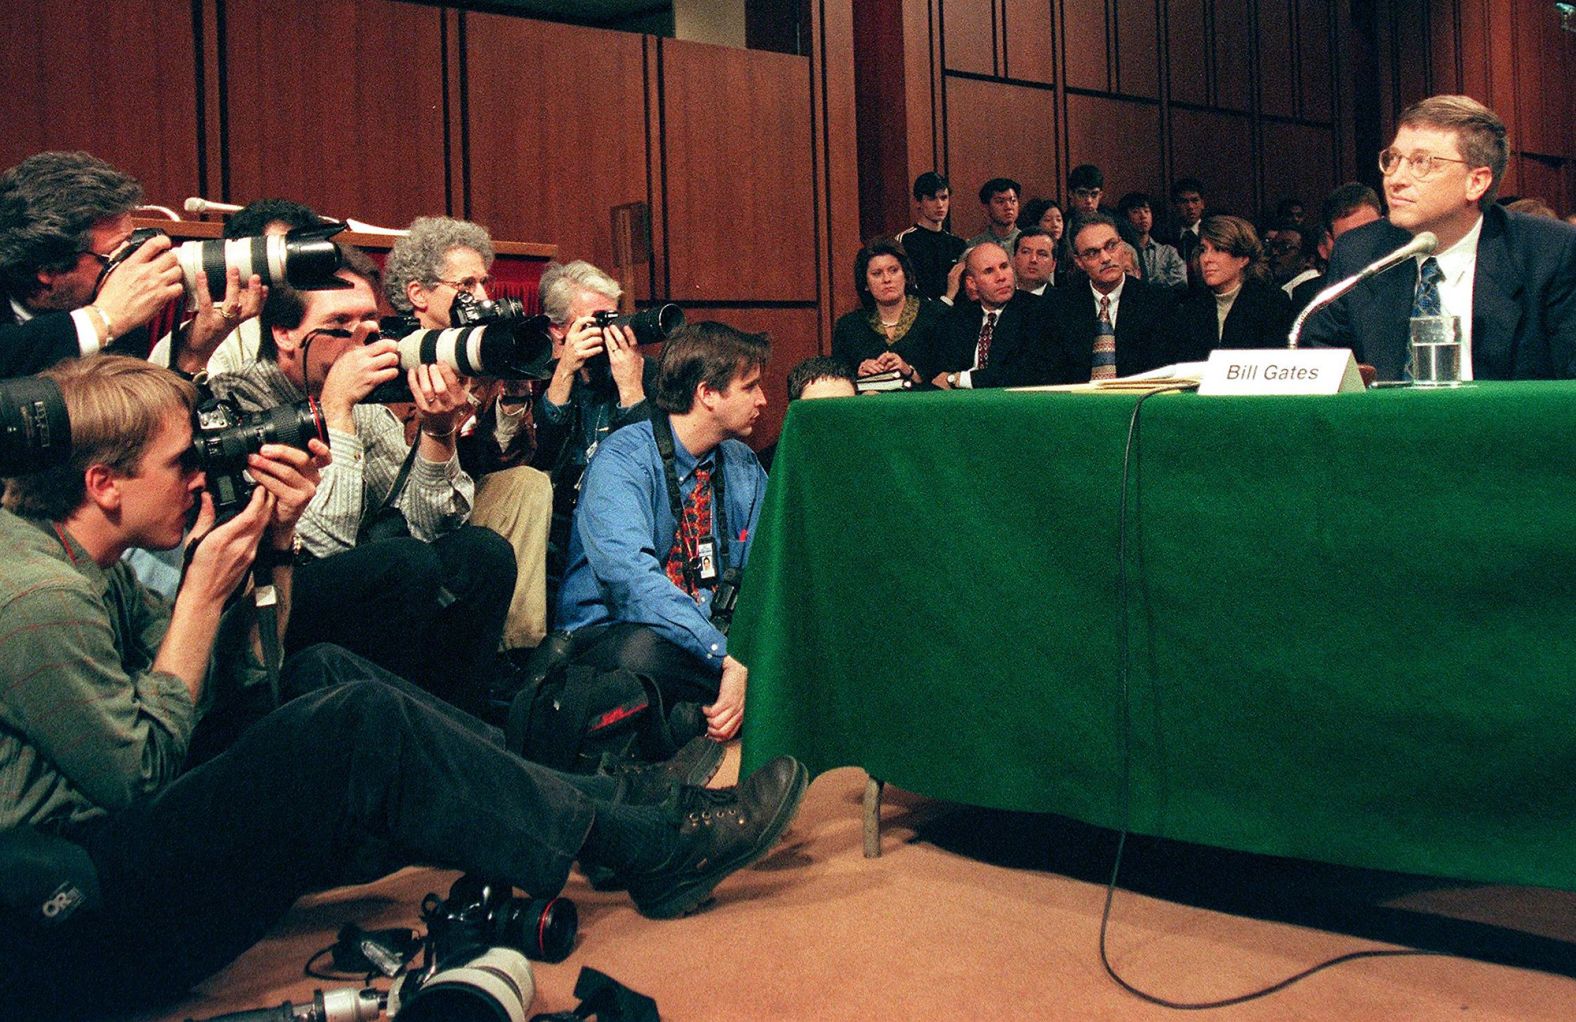 Photographers focus on Gates as he testifies before the US Senate Judiciary Committee in 1998. That year, the US Department of Justice, 20 states and the District of Columbia all filed lawsuits accusing Microsoft of using illegal, anti-competitive and exclusionary practices. In 2001, Microsoft <a href="https://money.cnn.com/2001/11/01/news/microsoft_chronology/" target="_blank">reached a settlement with the Justice Department</a>.